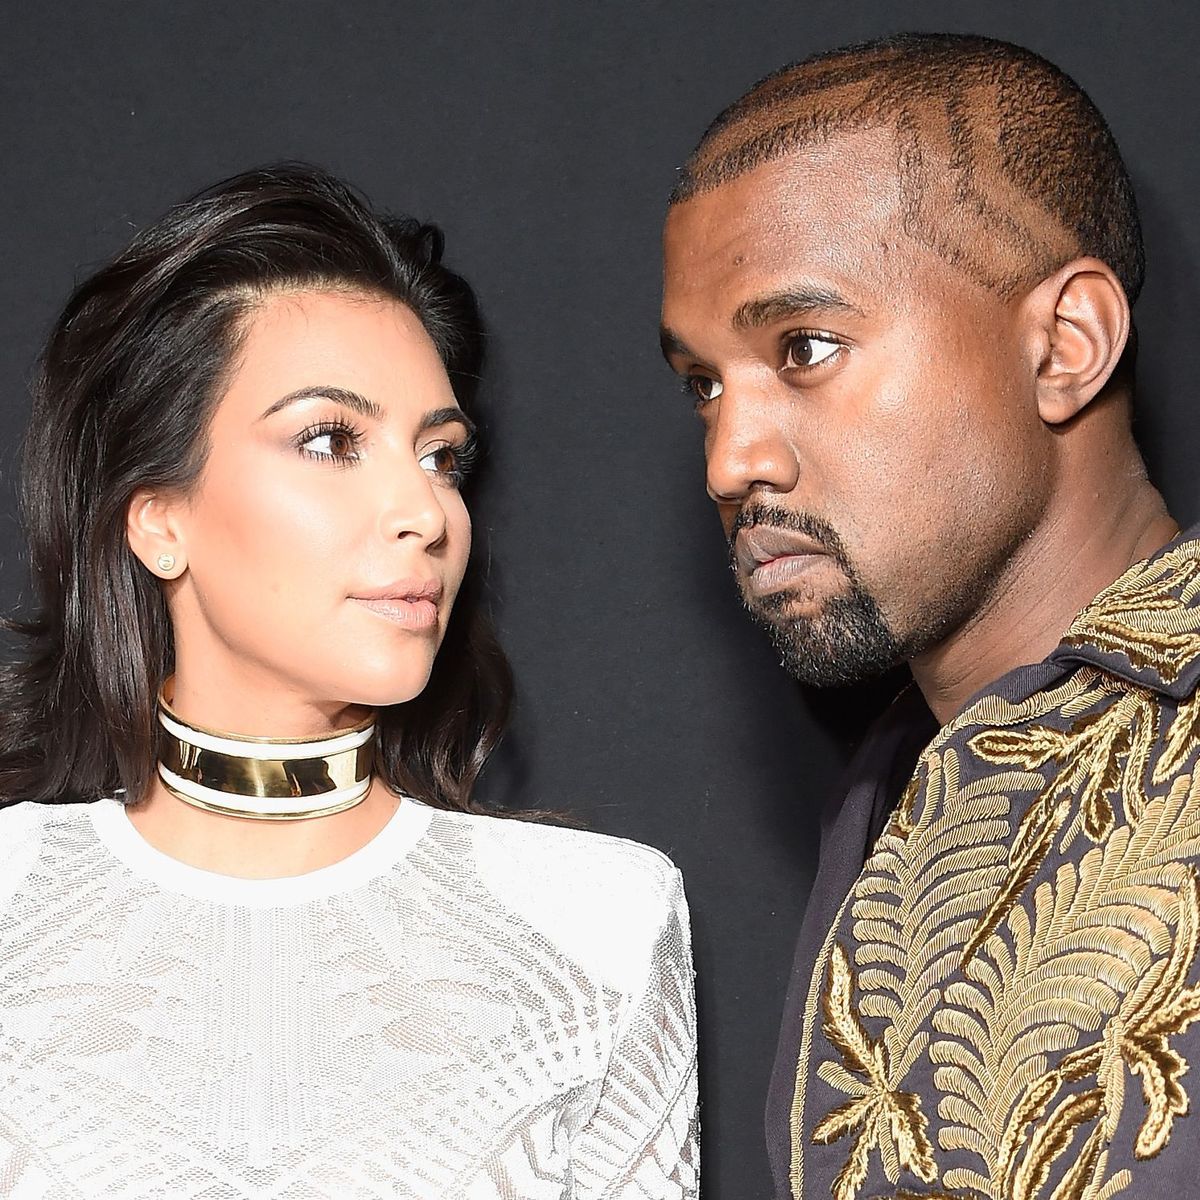 Kim Kardashian Made the First Move in Relationship with Kanye West ...